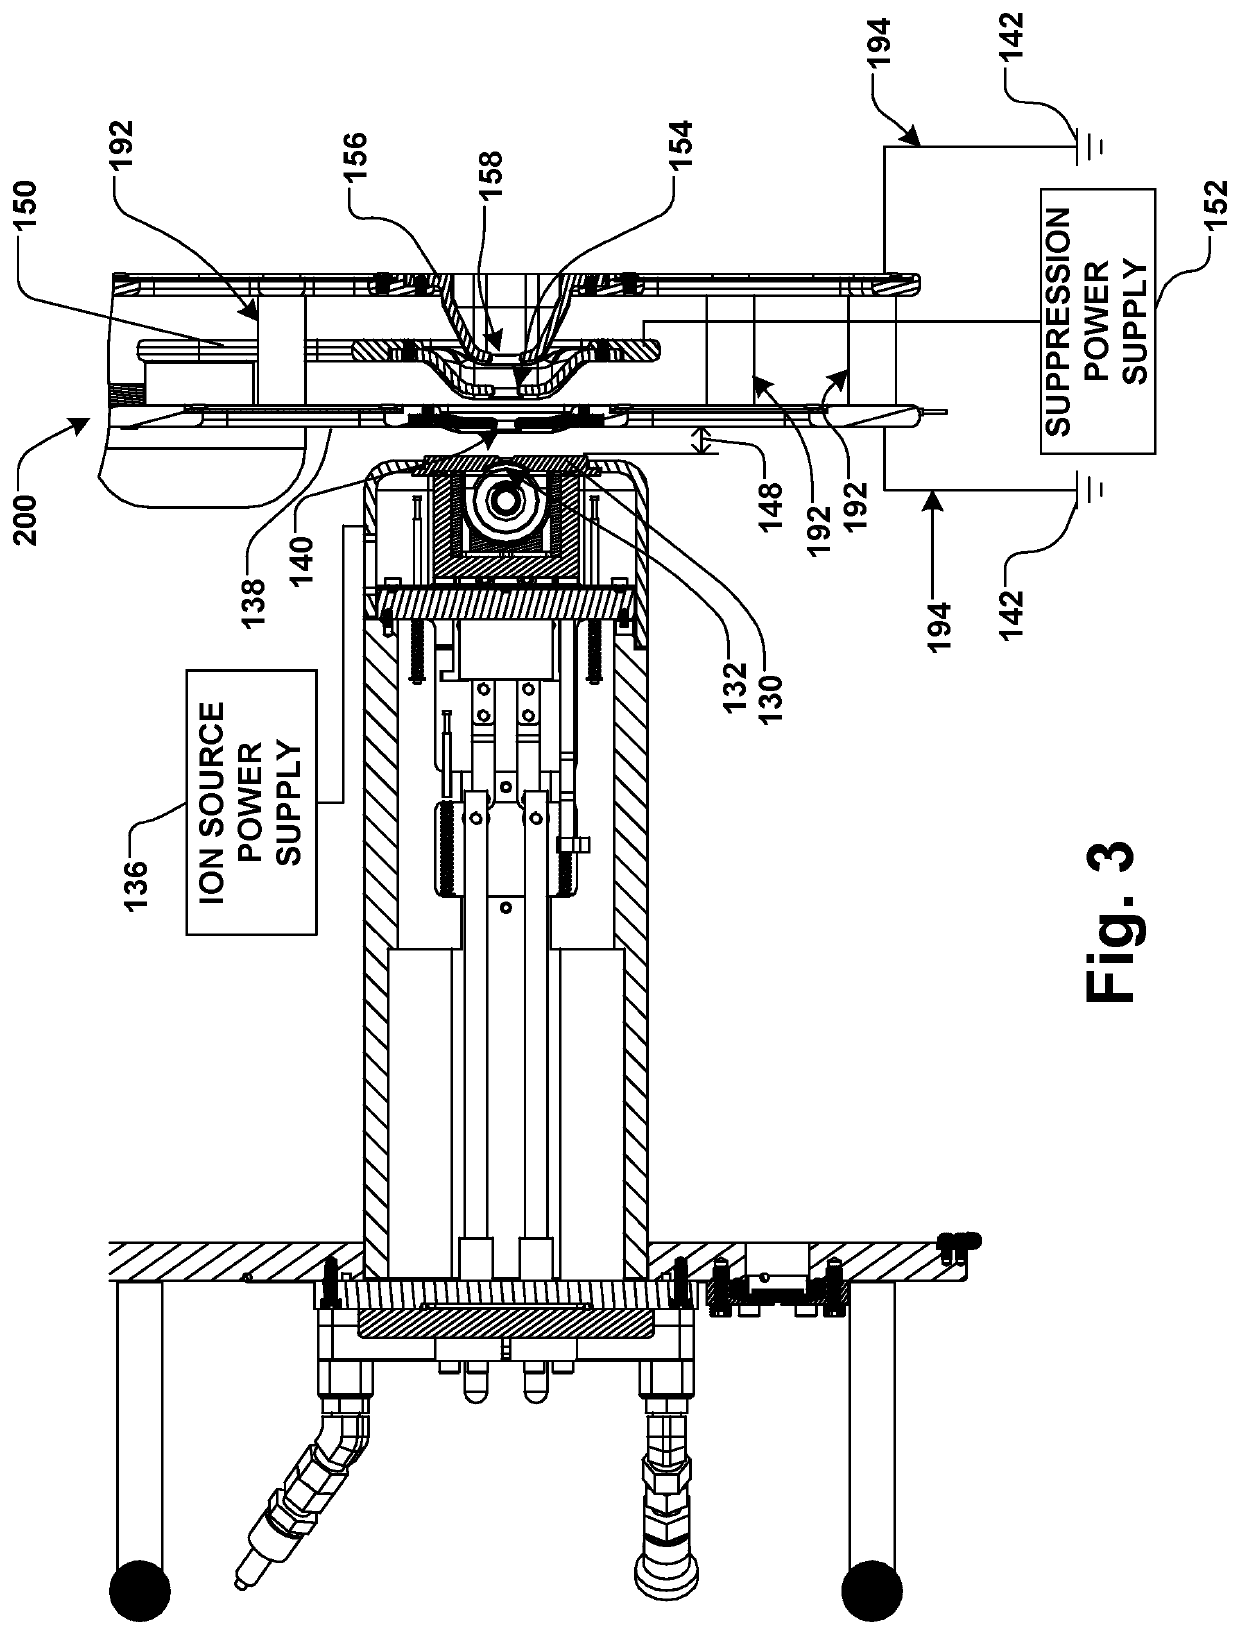 Tetrode extraction apparatus for ion source